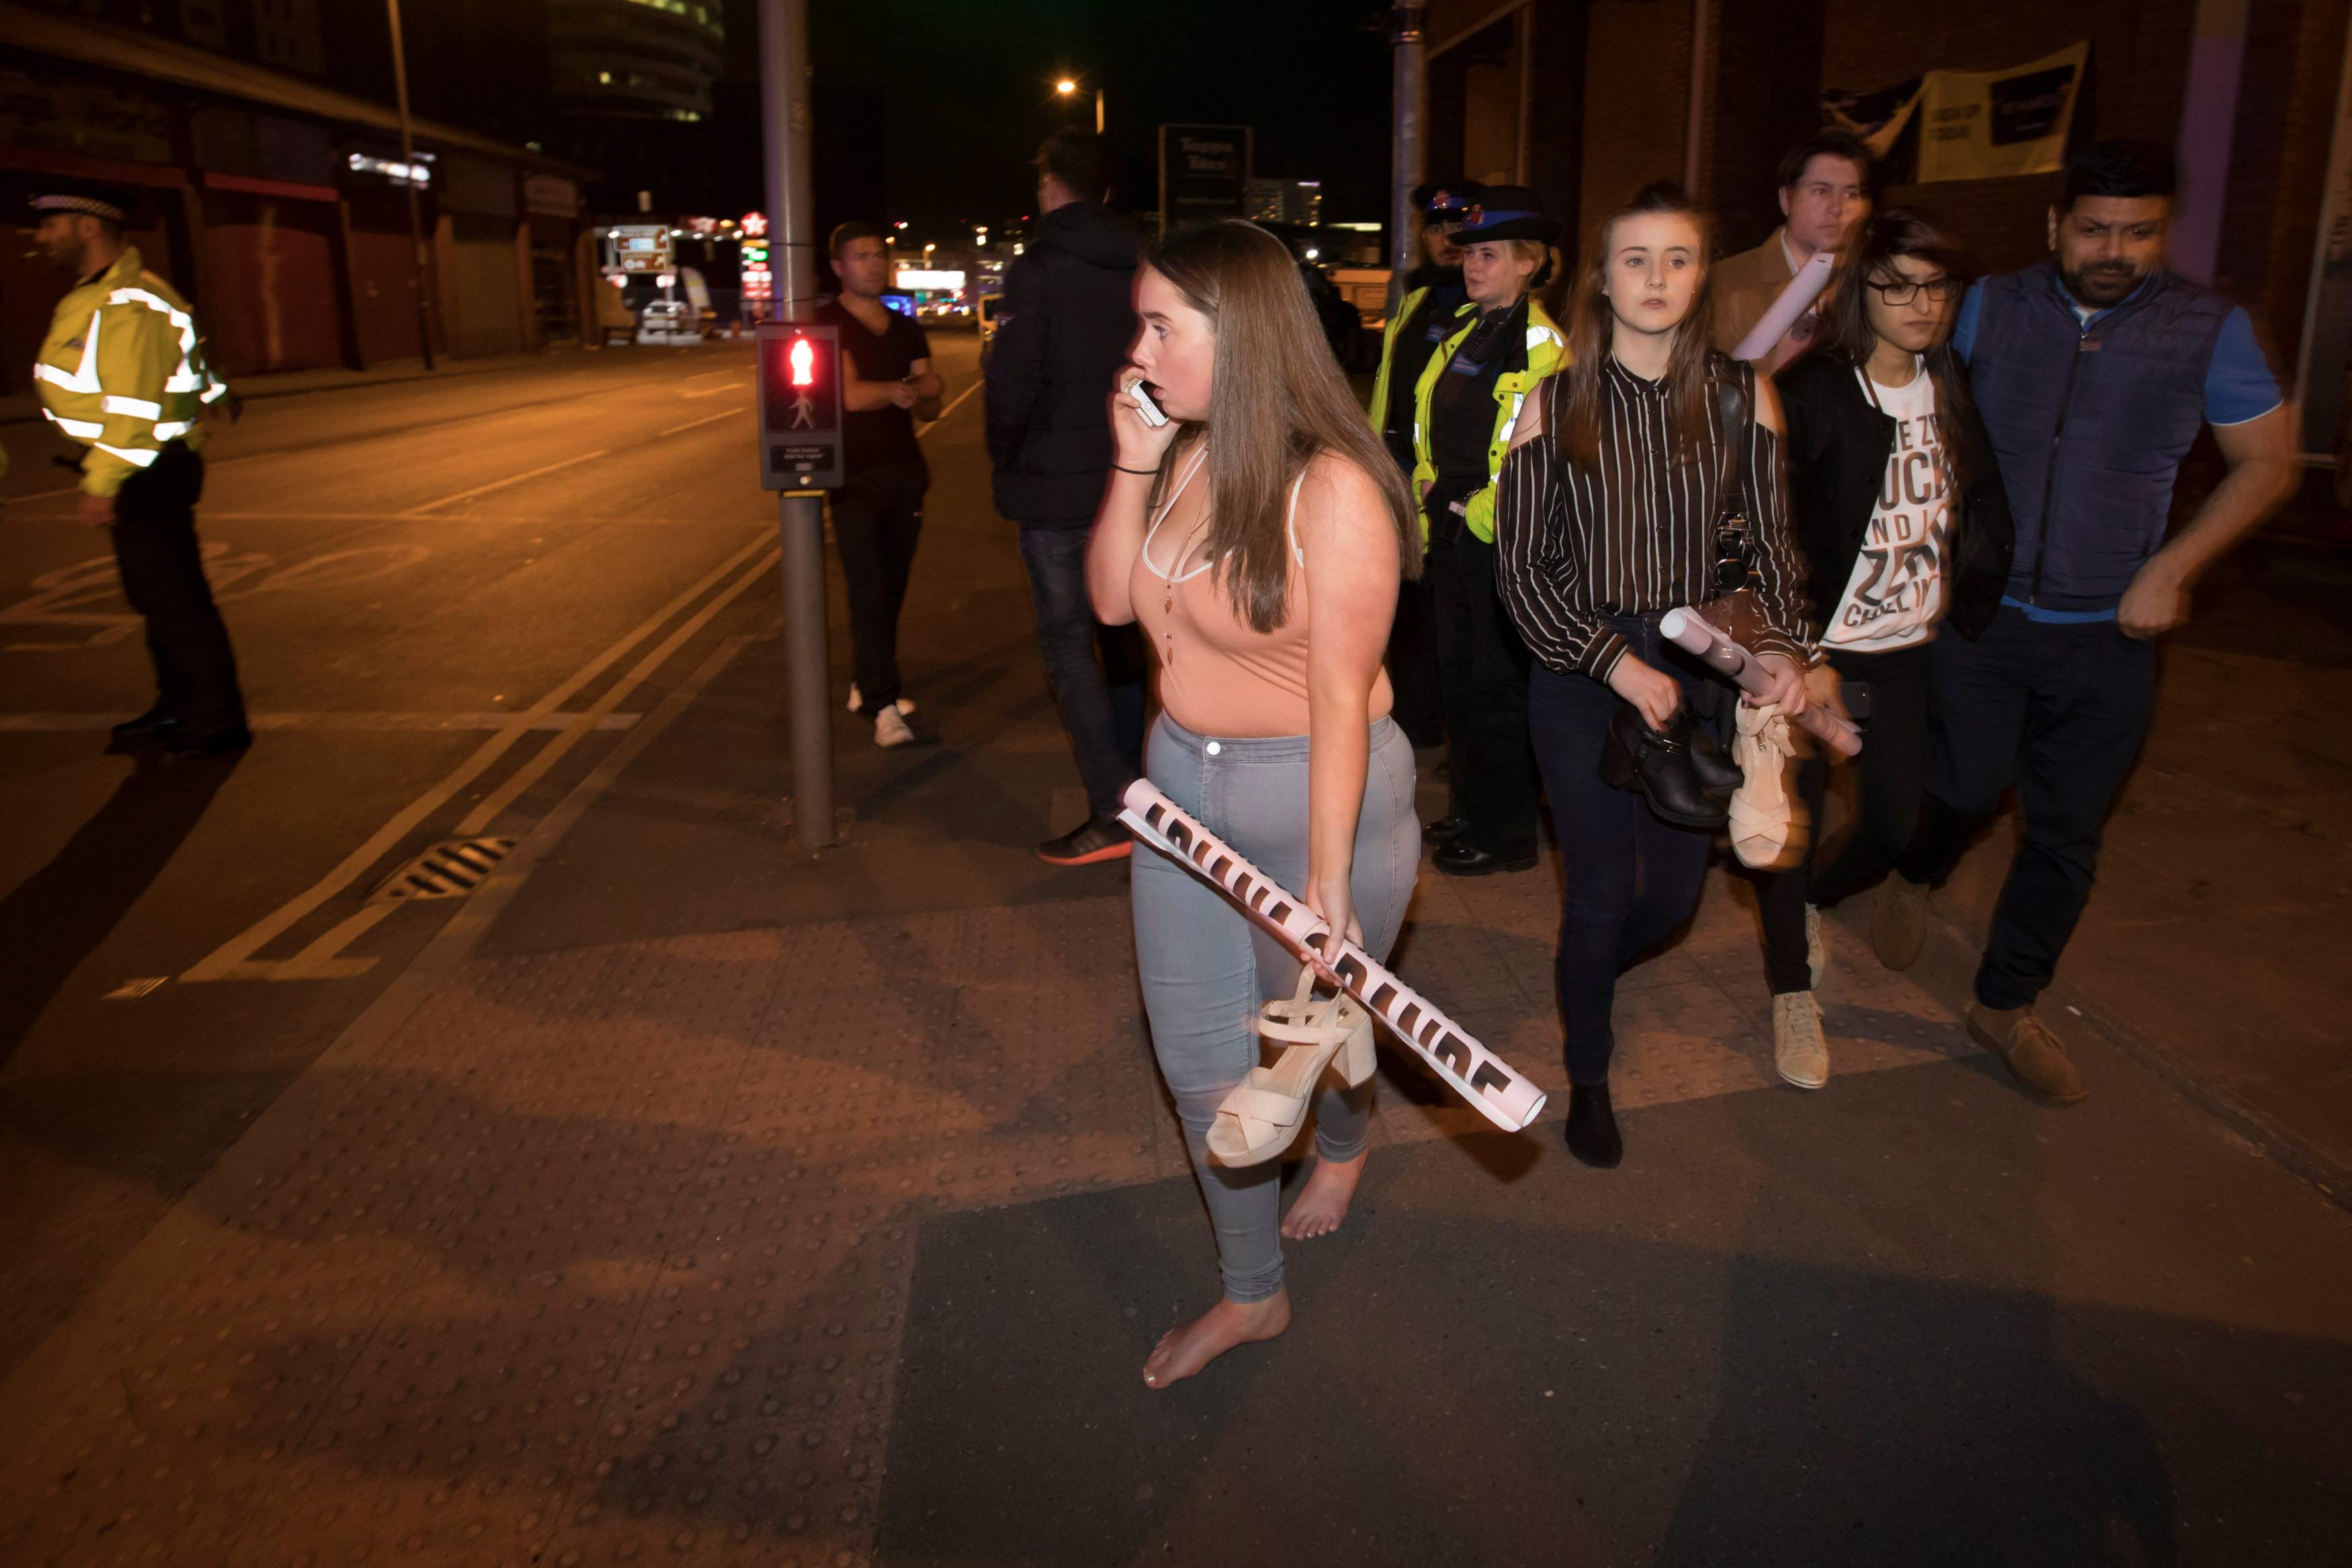 Concert goers react after fleeing the Manchester Arena in northern England where U.S. singer Ariana Grande had been performing in Manchester. Photo: Jon Super / Reuters